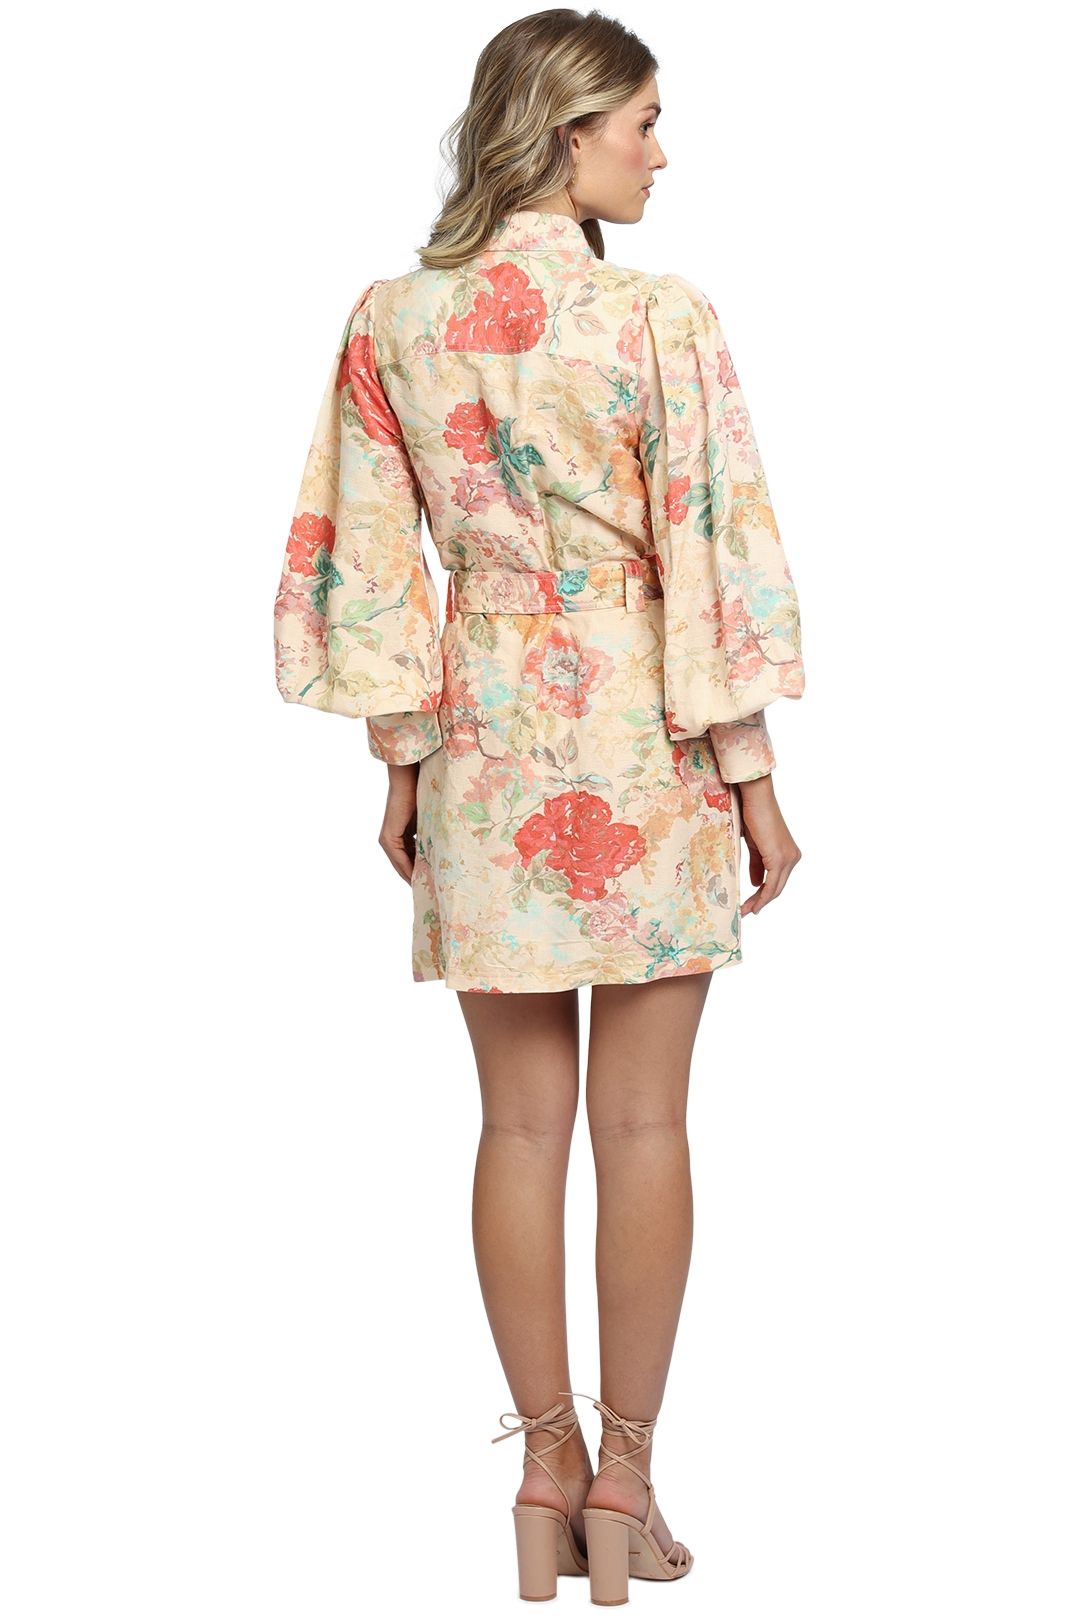 Significant Other Odessa Dress Picnic Peonies shirt